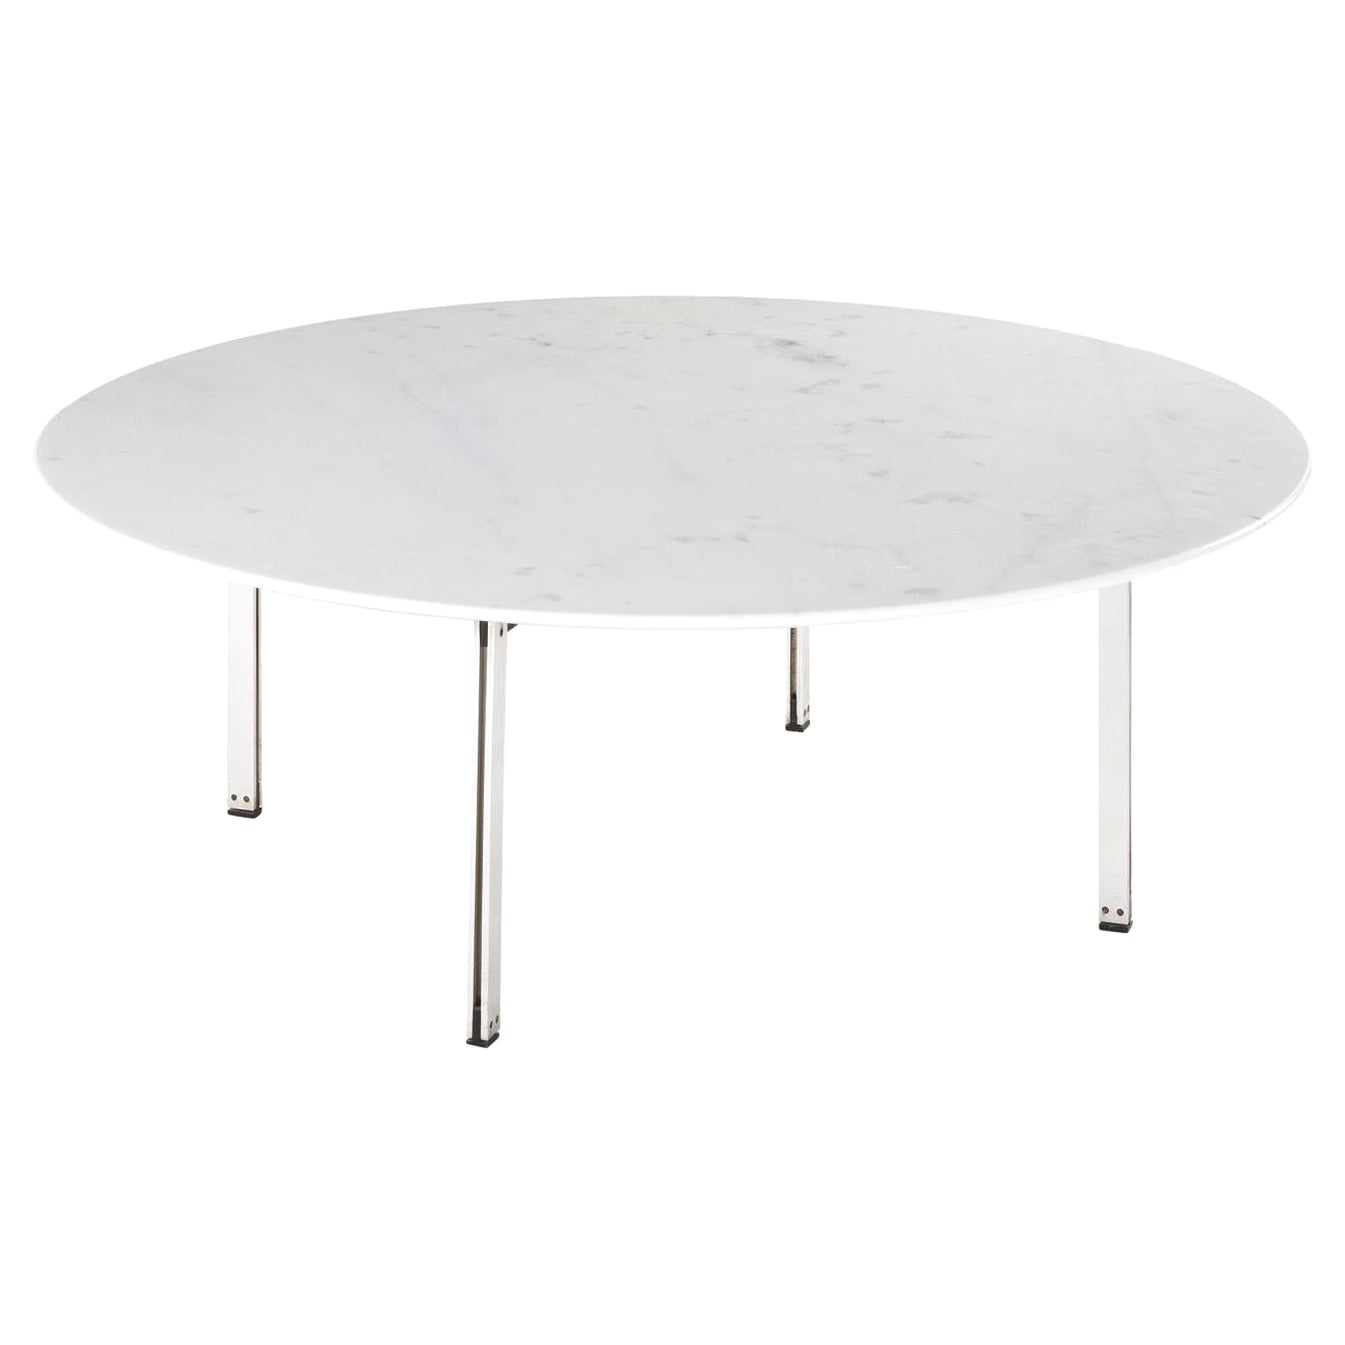 Florence Knoll Round Low Table in White Marble and Metal by Knoll, 1950s, Italy